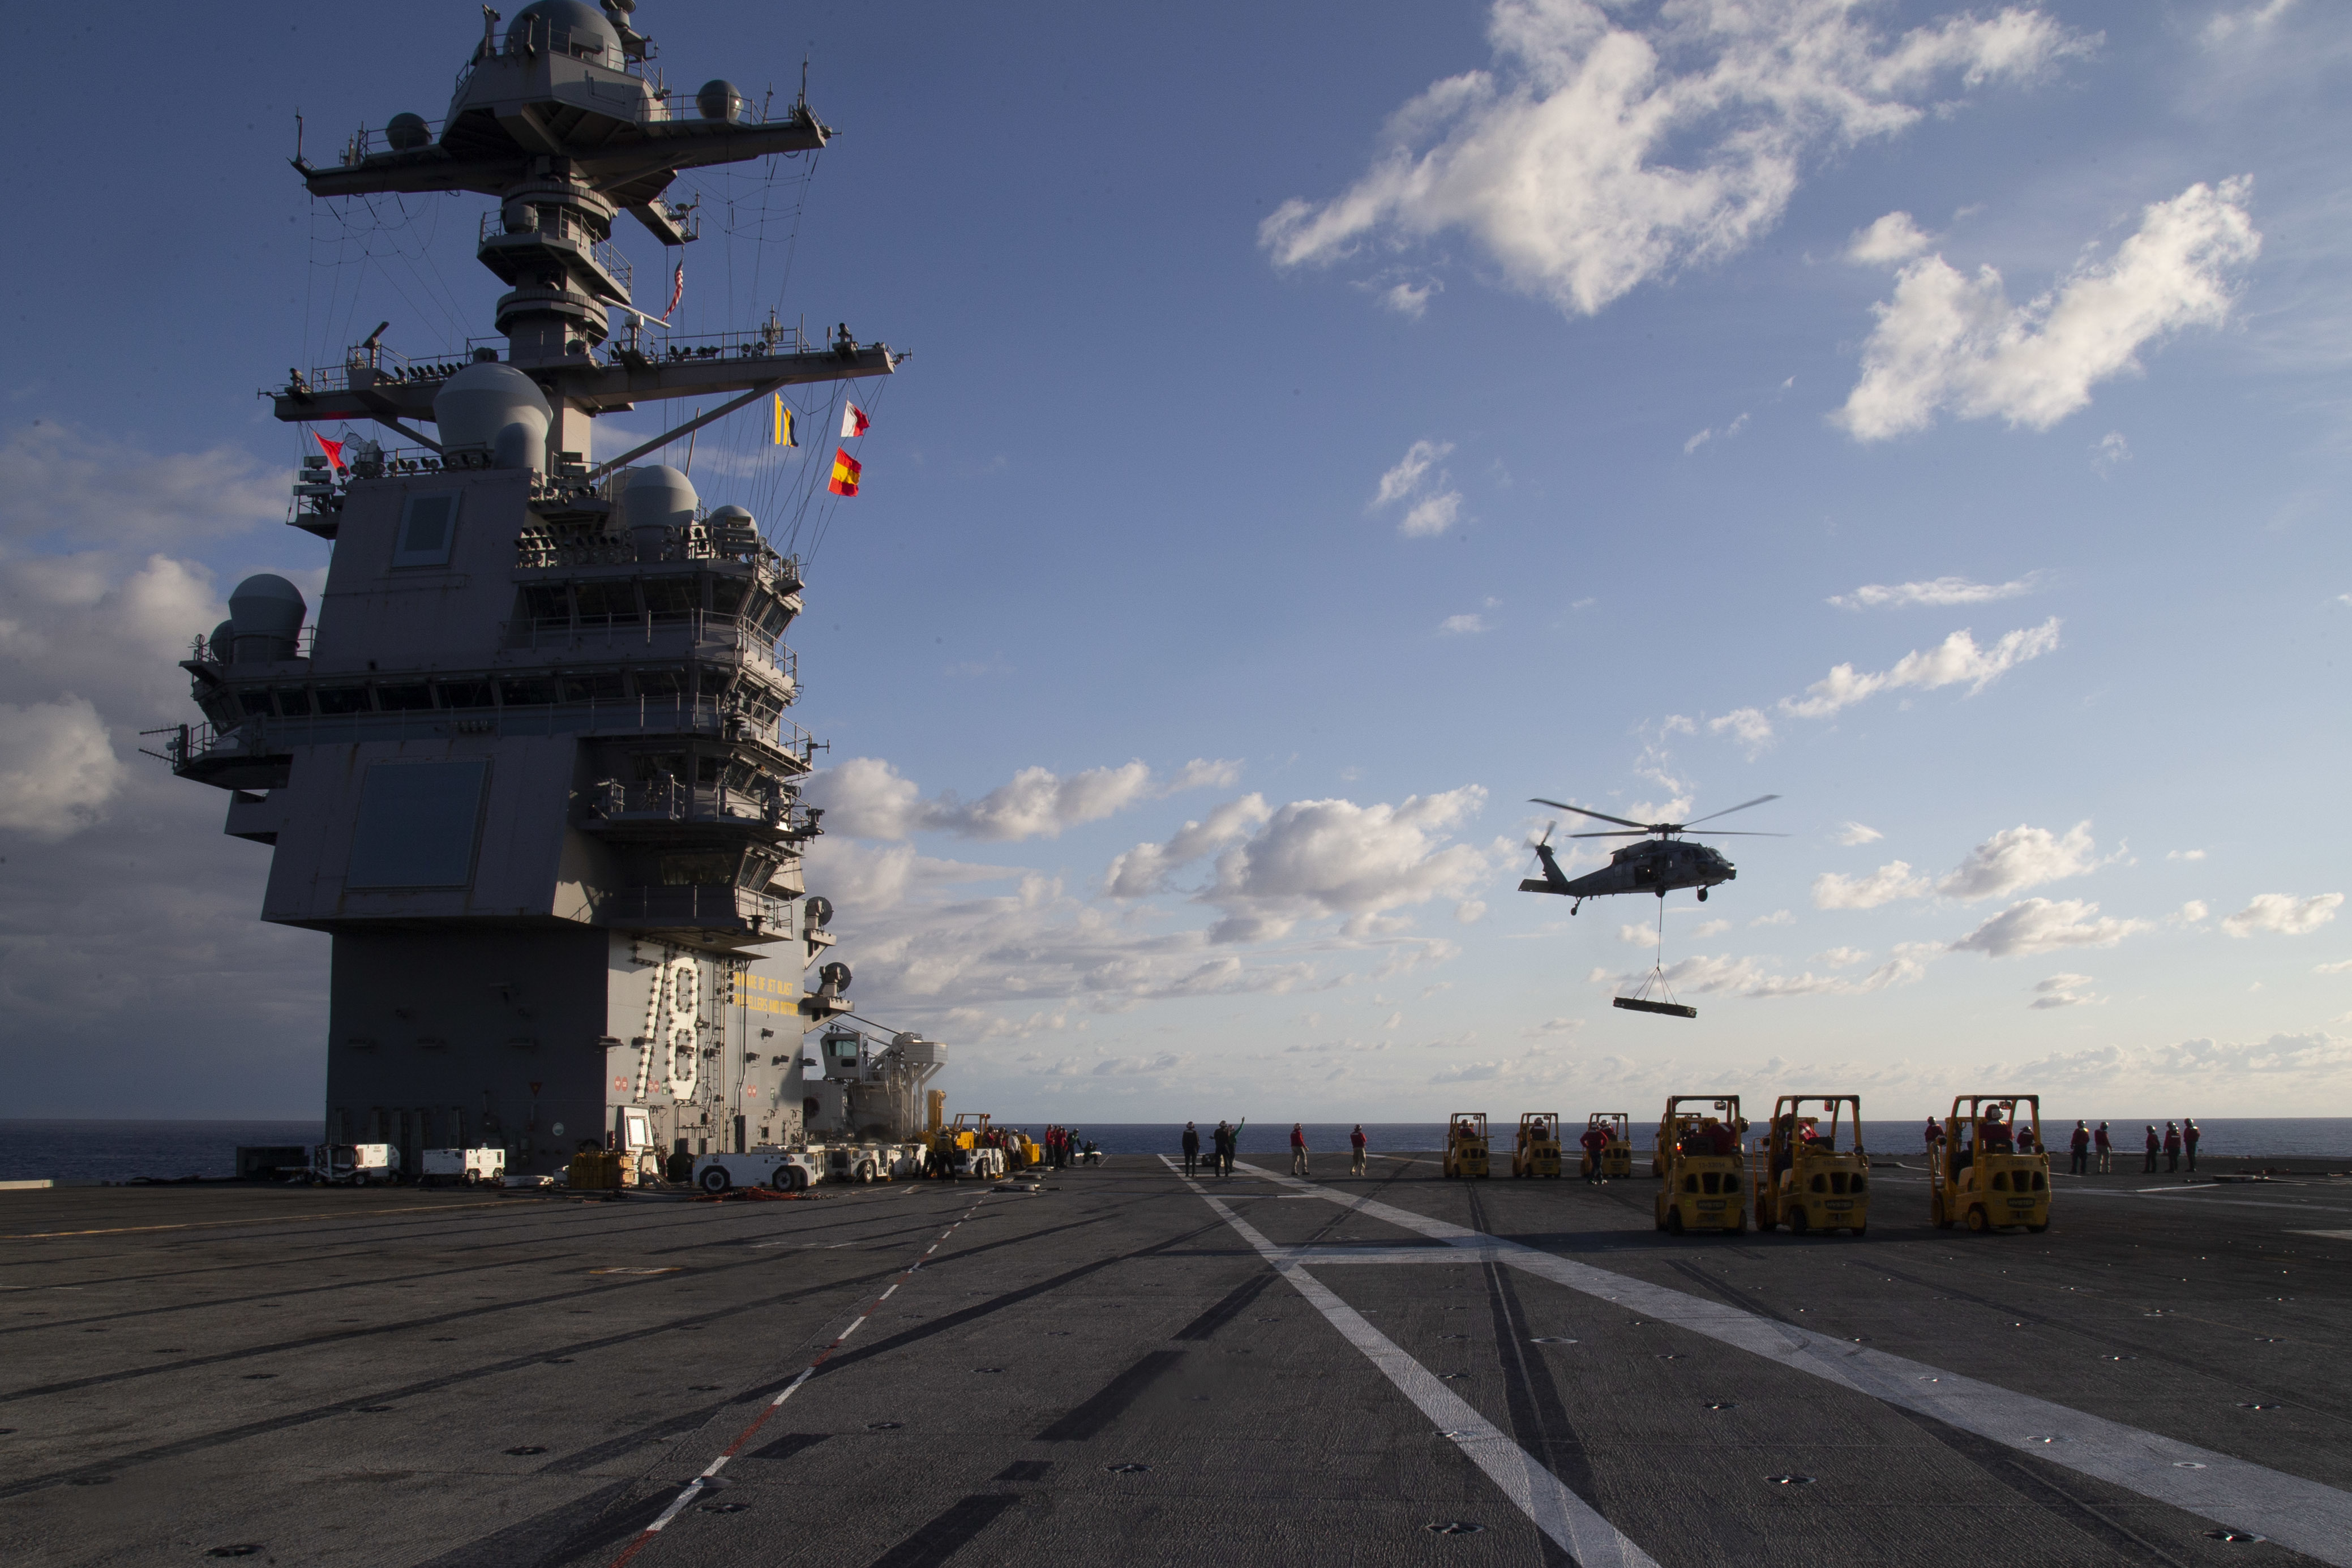 Carrier USS Gerald R. Ford to Embark on Short Cruise Ahead of Full